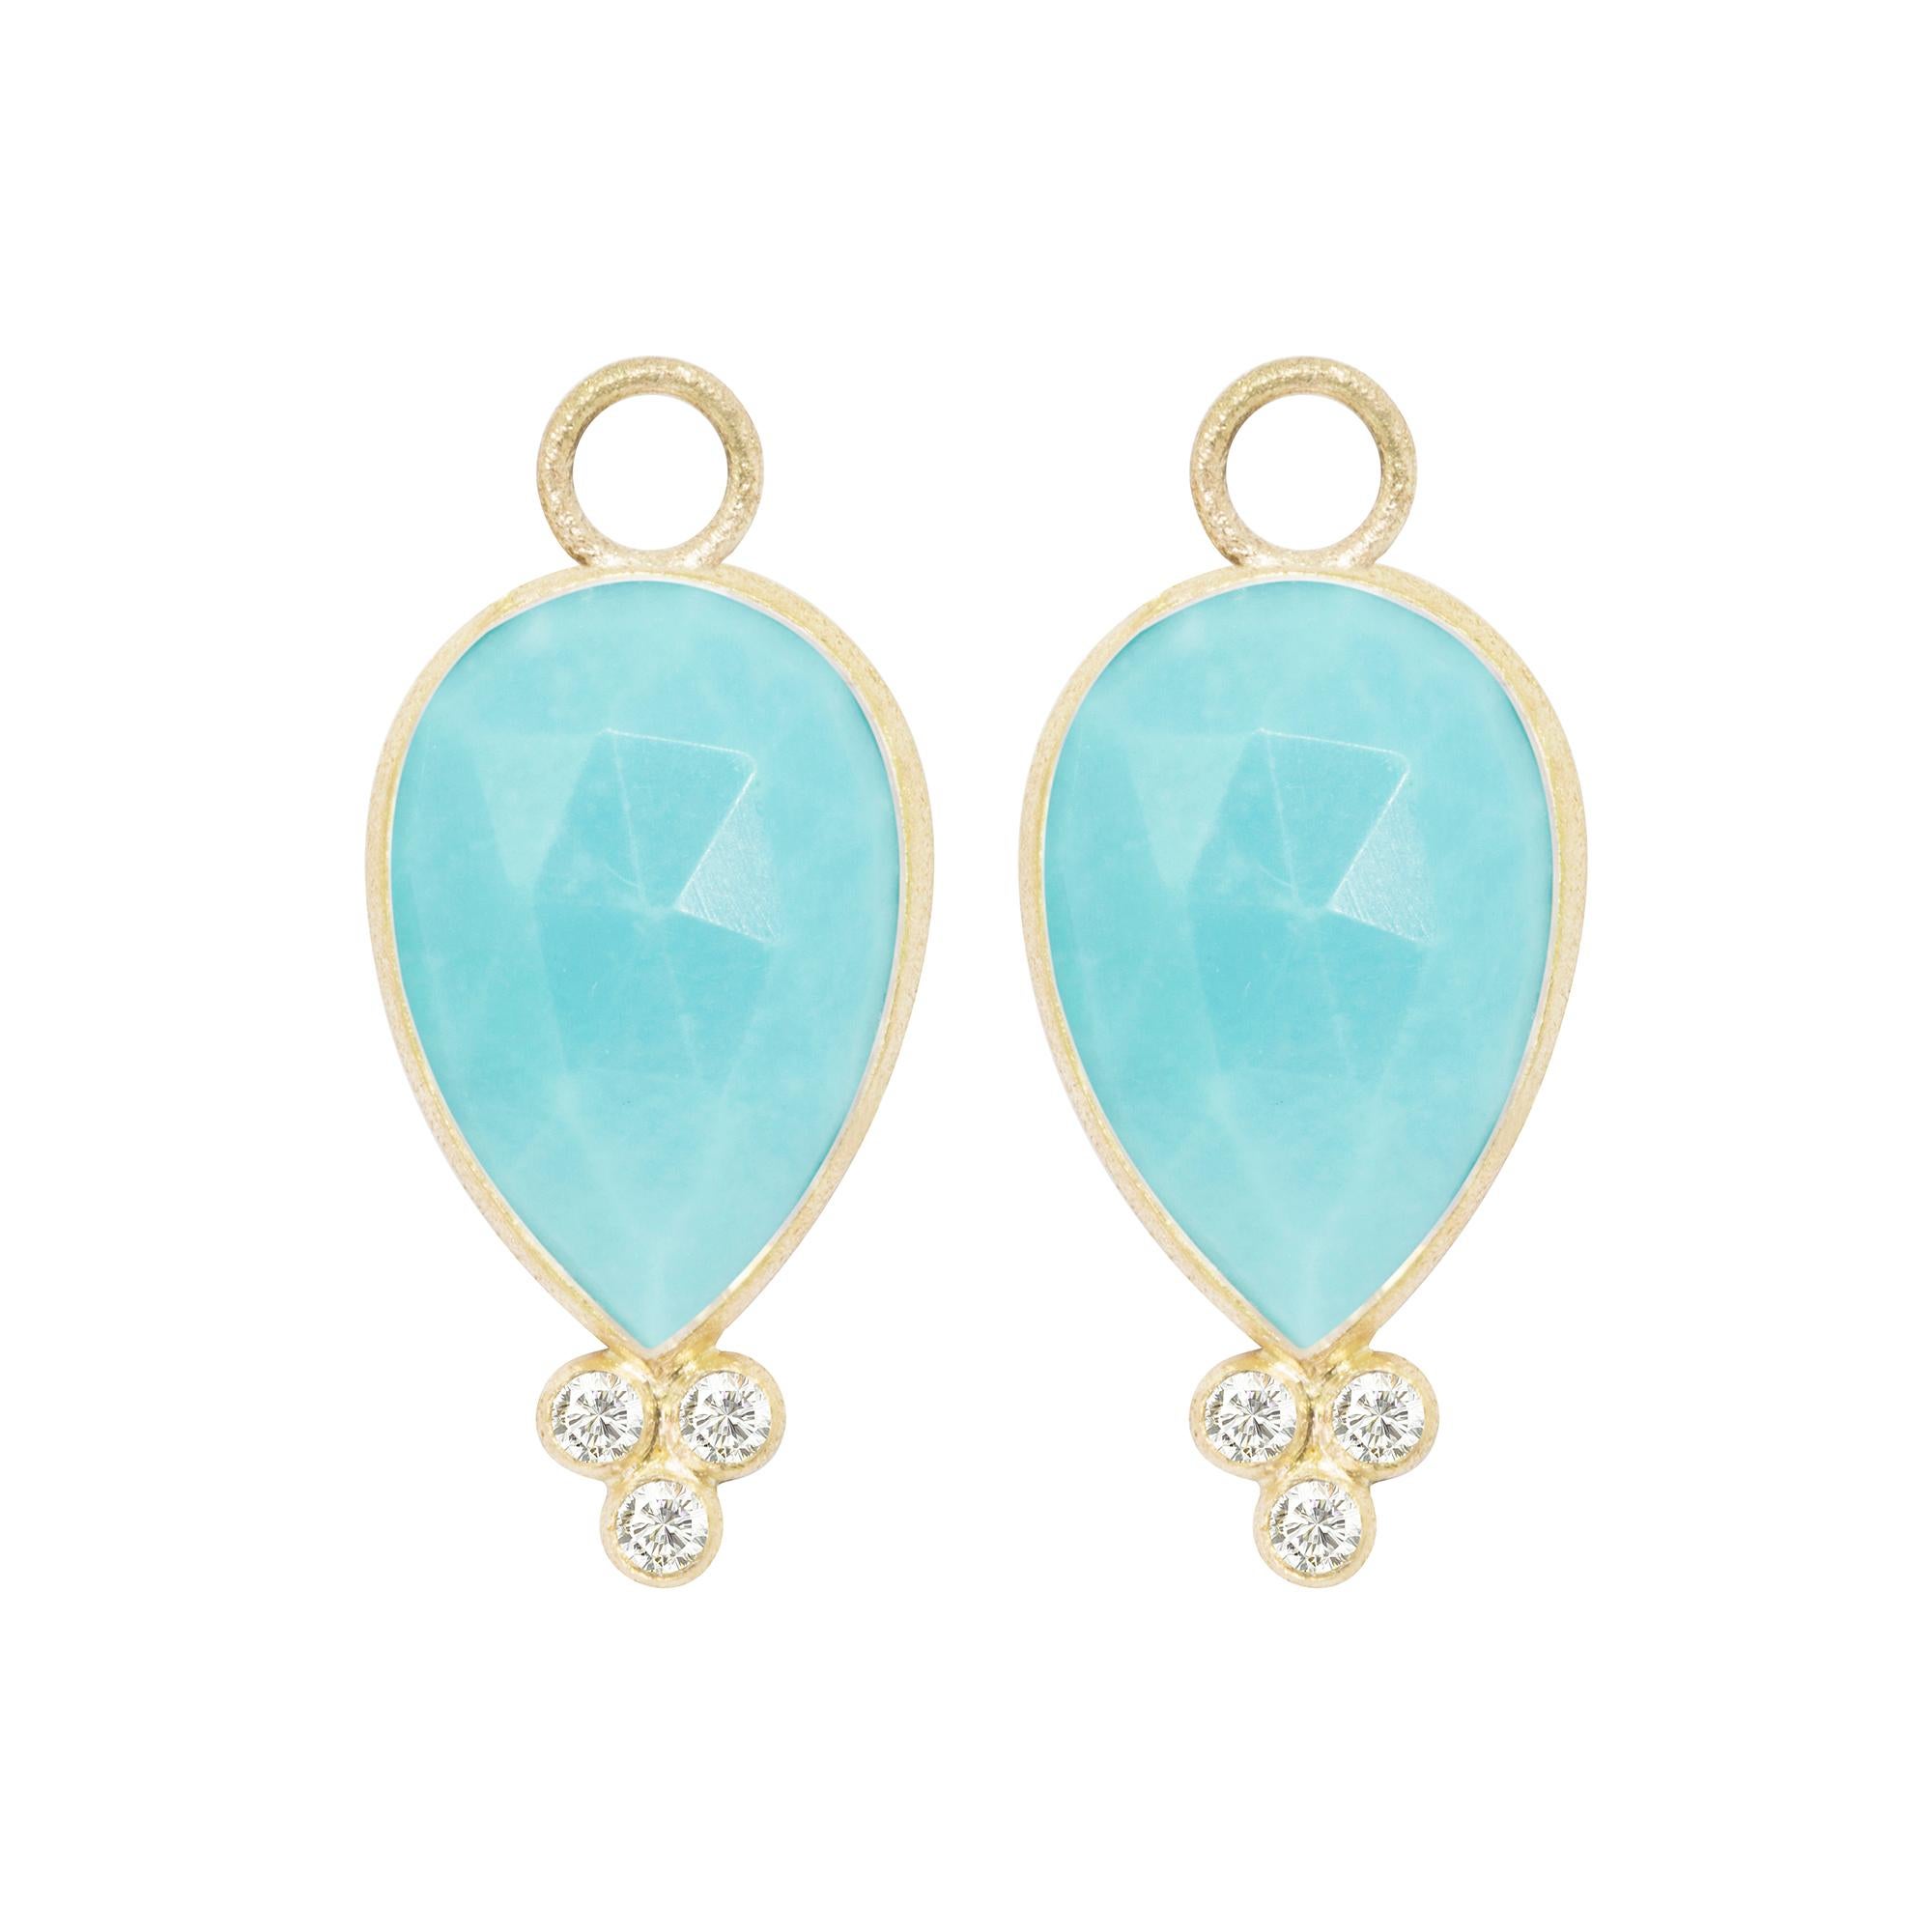 Women's or Men's Mia Small Turquoise Charms and Intricate Oxidized Reversible Huggies Earrings